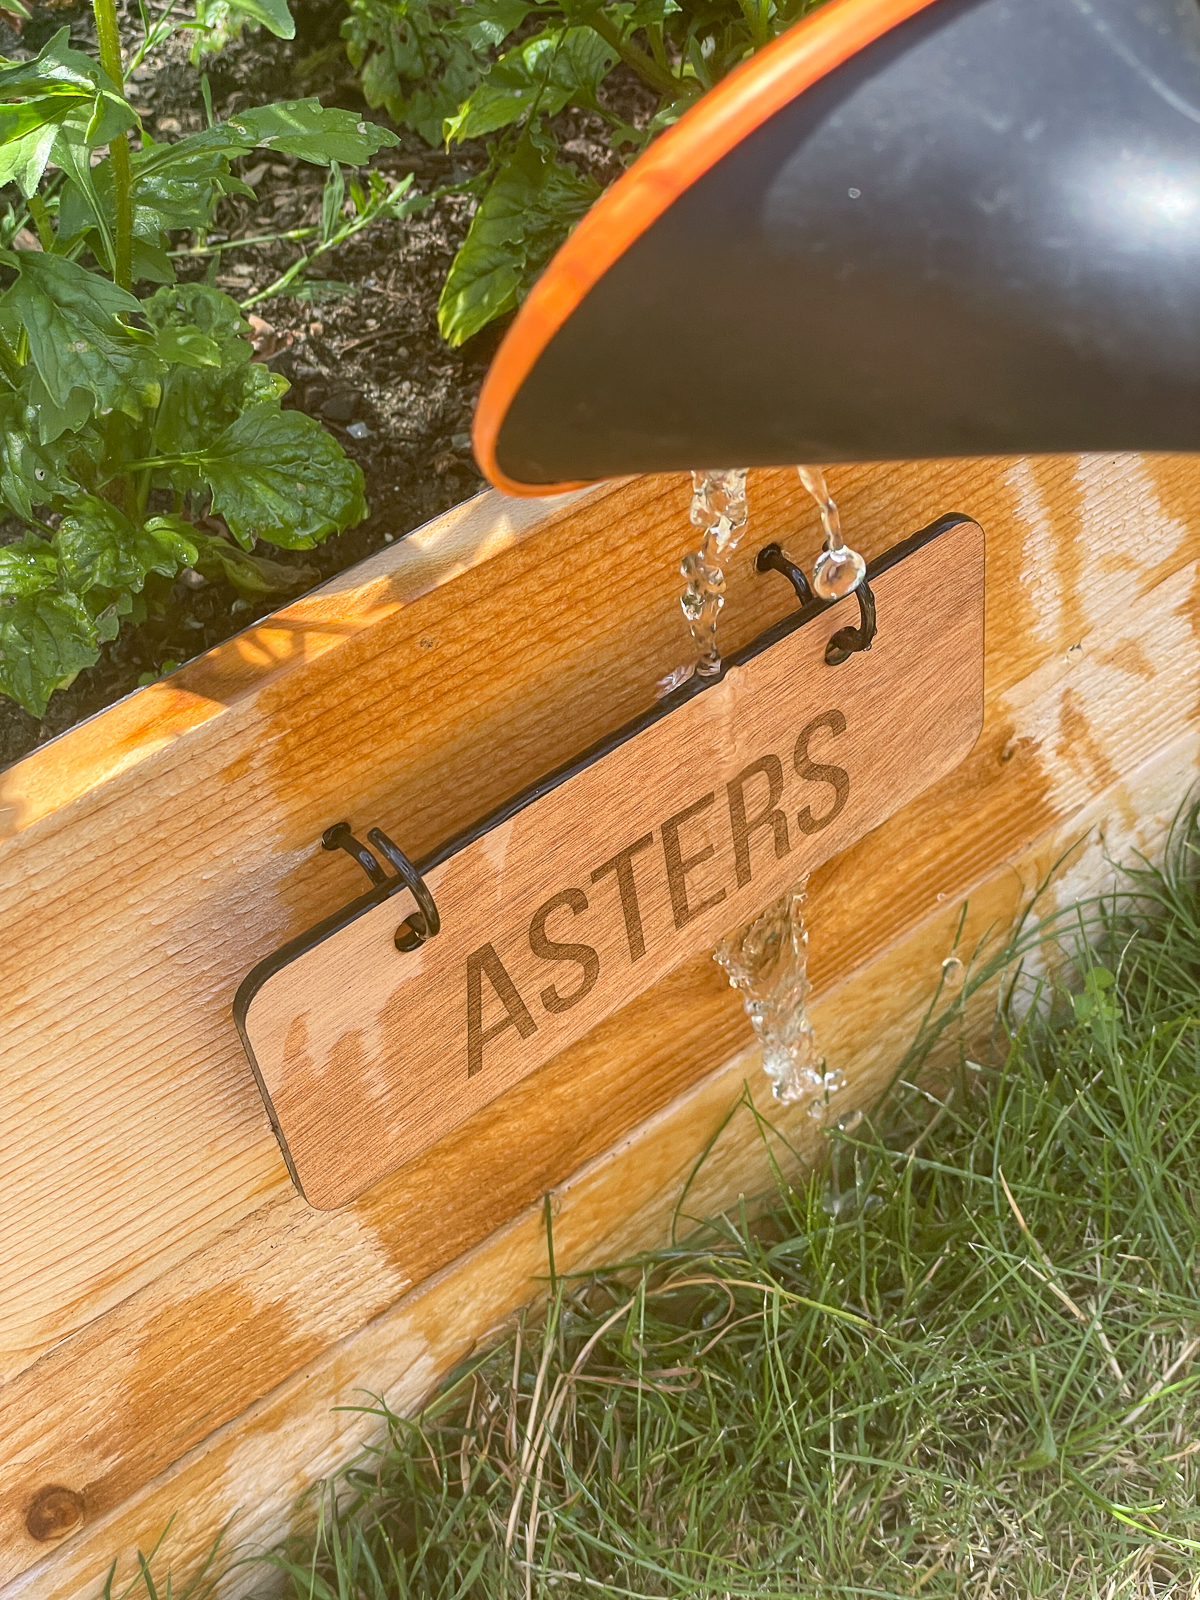 DIY garden label getting wet from watering can